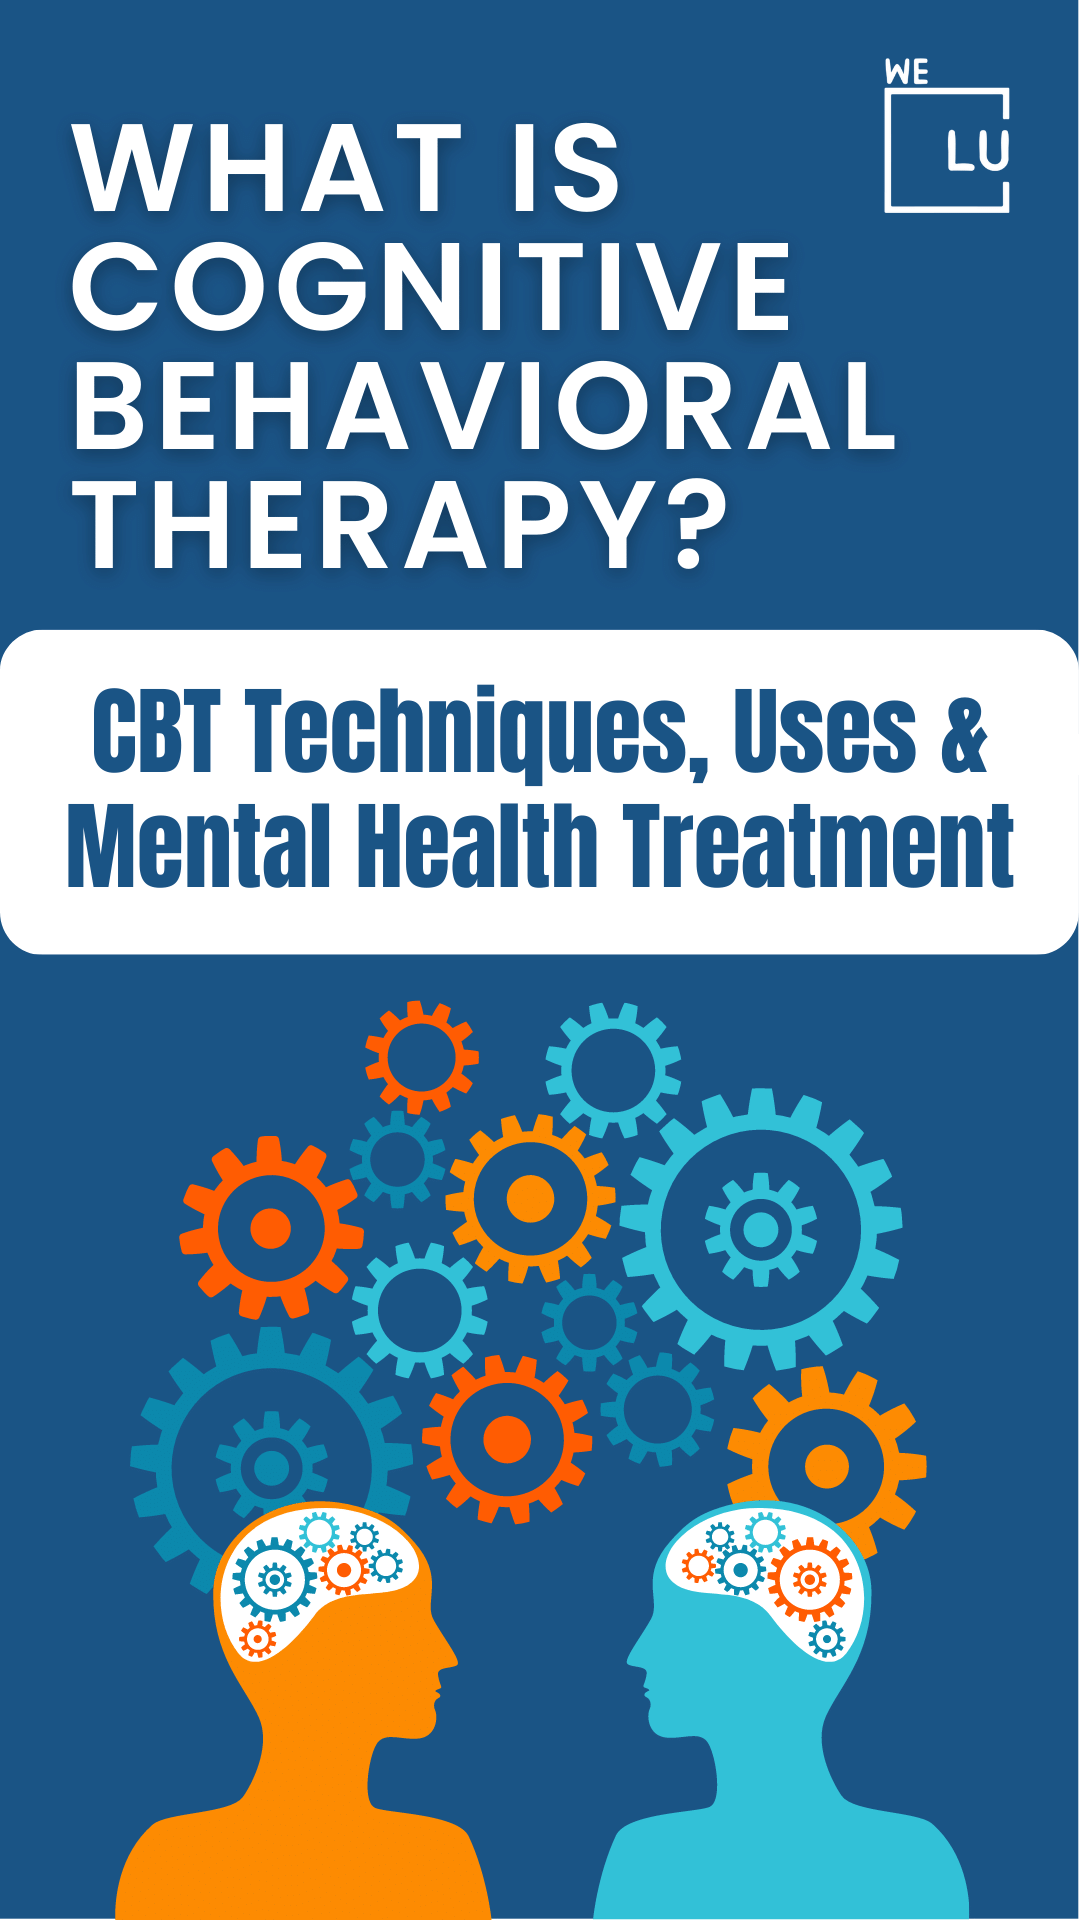 CBT vs DBT Guide. Which One is Better for You? DBT vs CBT Therapy. How to Search CBT Therapy Near Me & DBT Therapy Near Me?